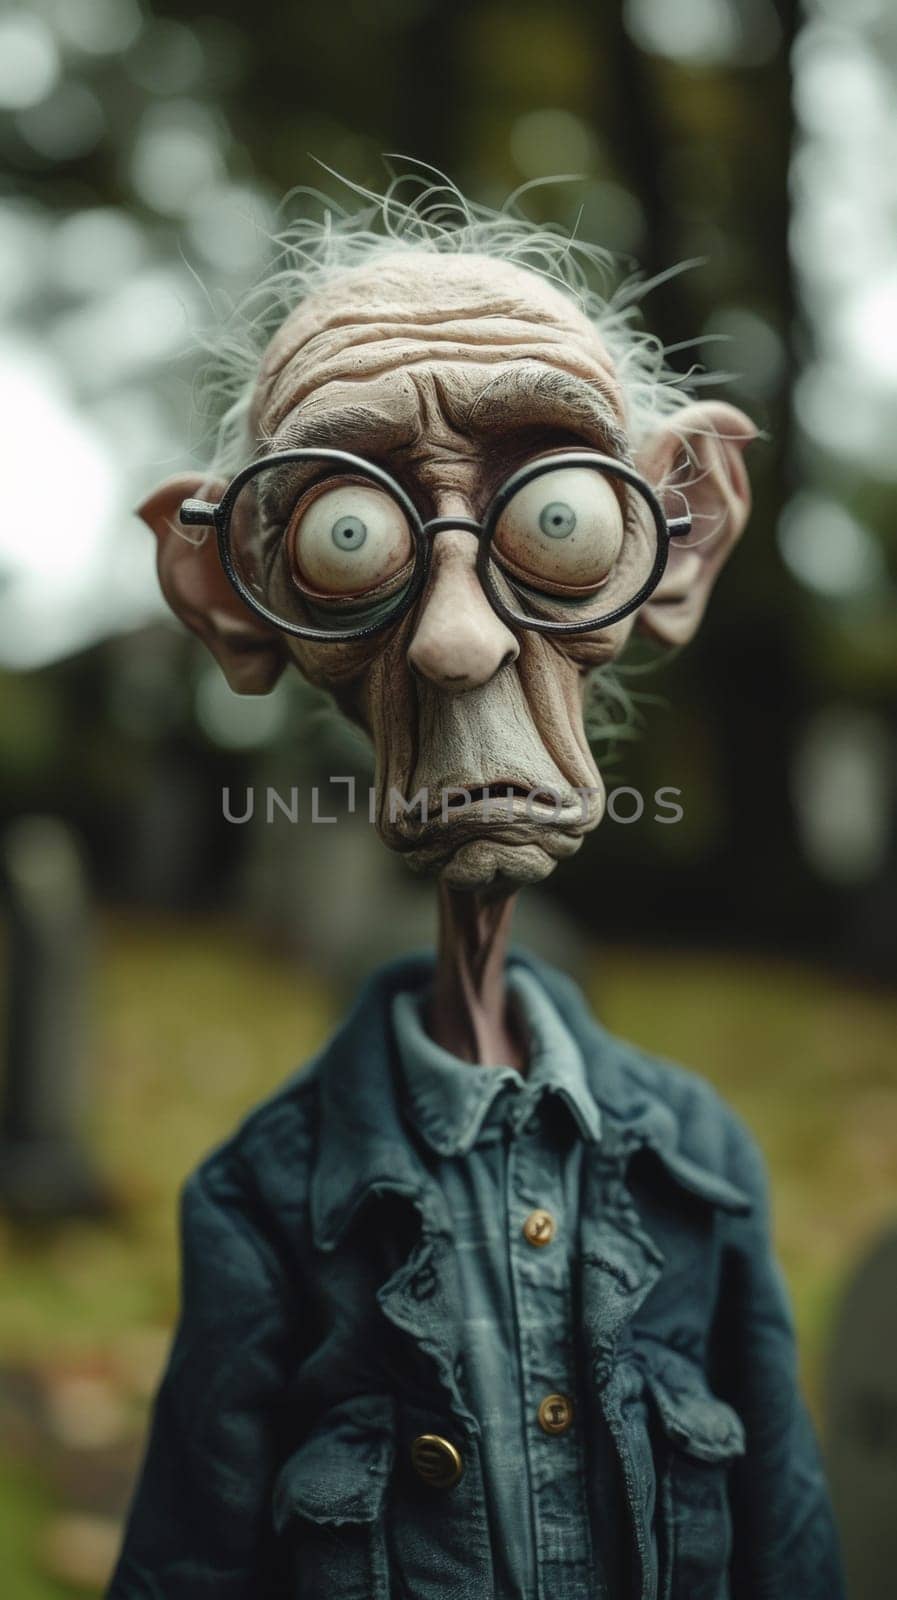 A creepy looking old man with glasses and a jacket